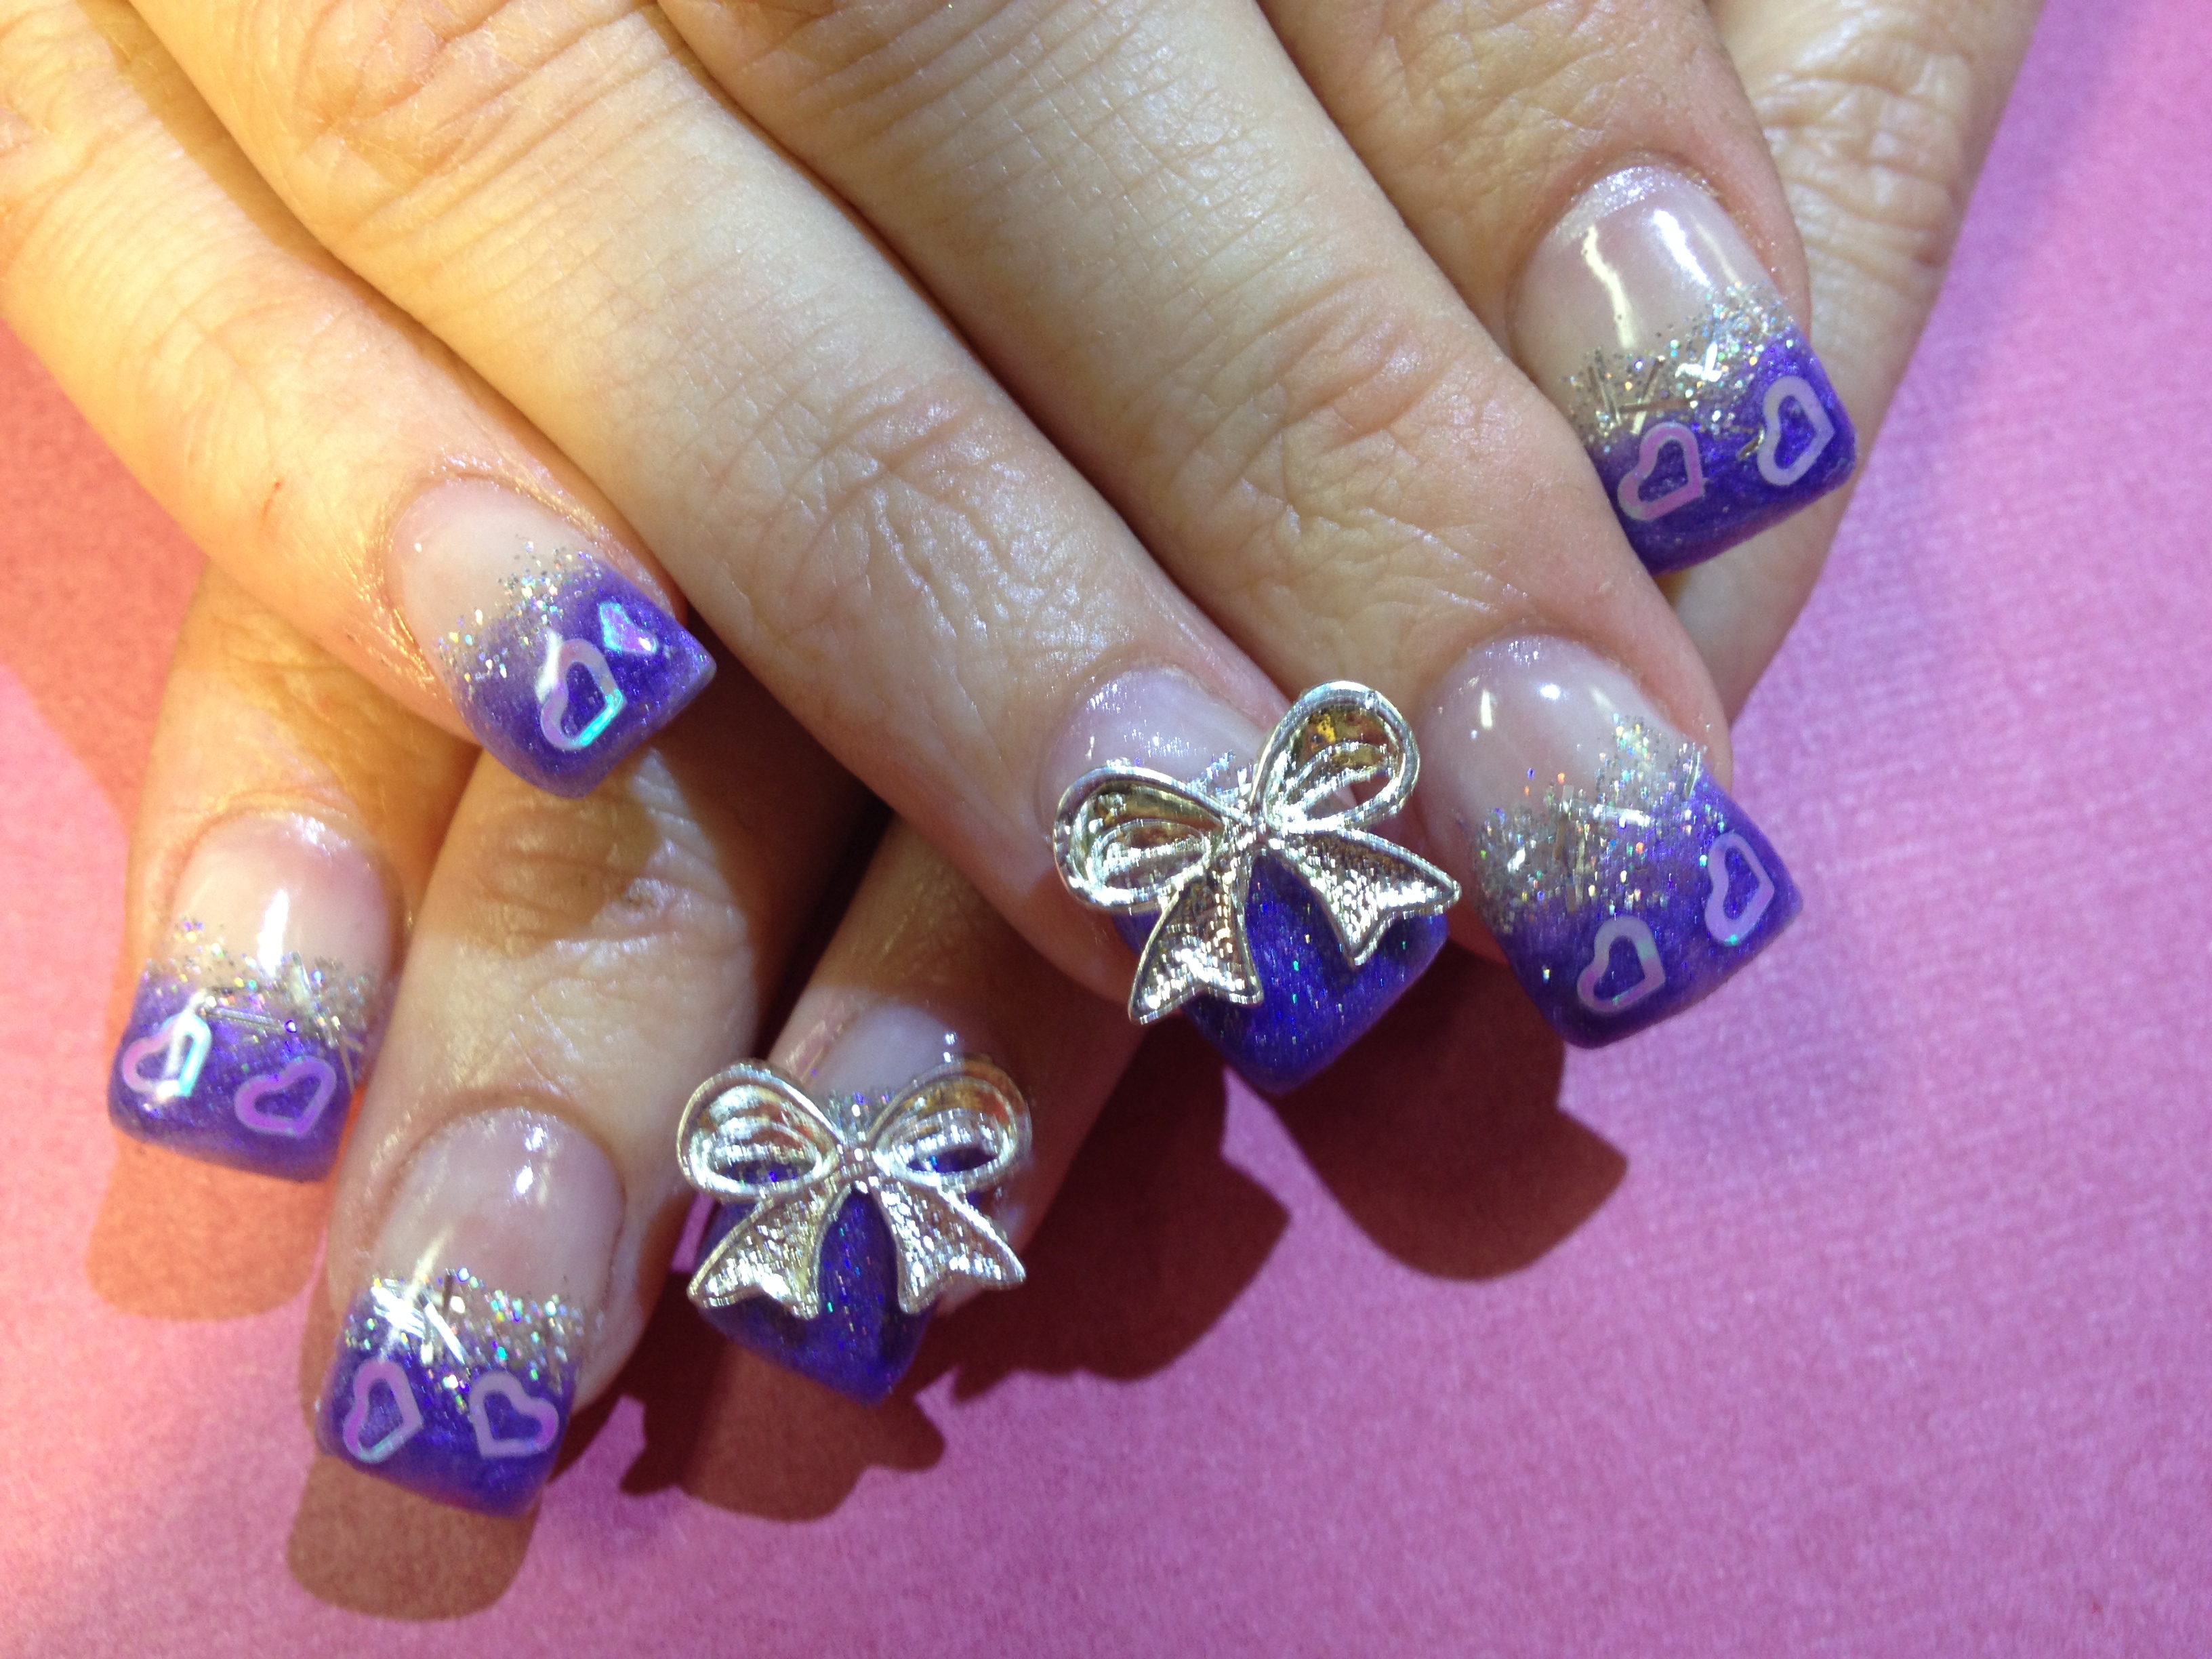 4. Purple and Silver Marble Nail Art - wide 5